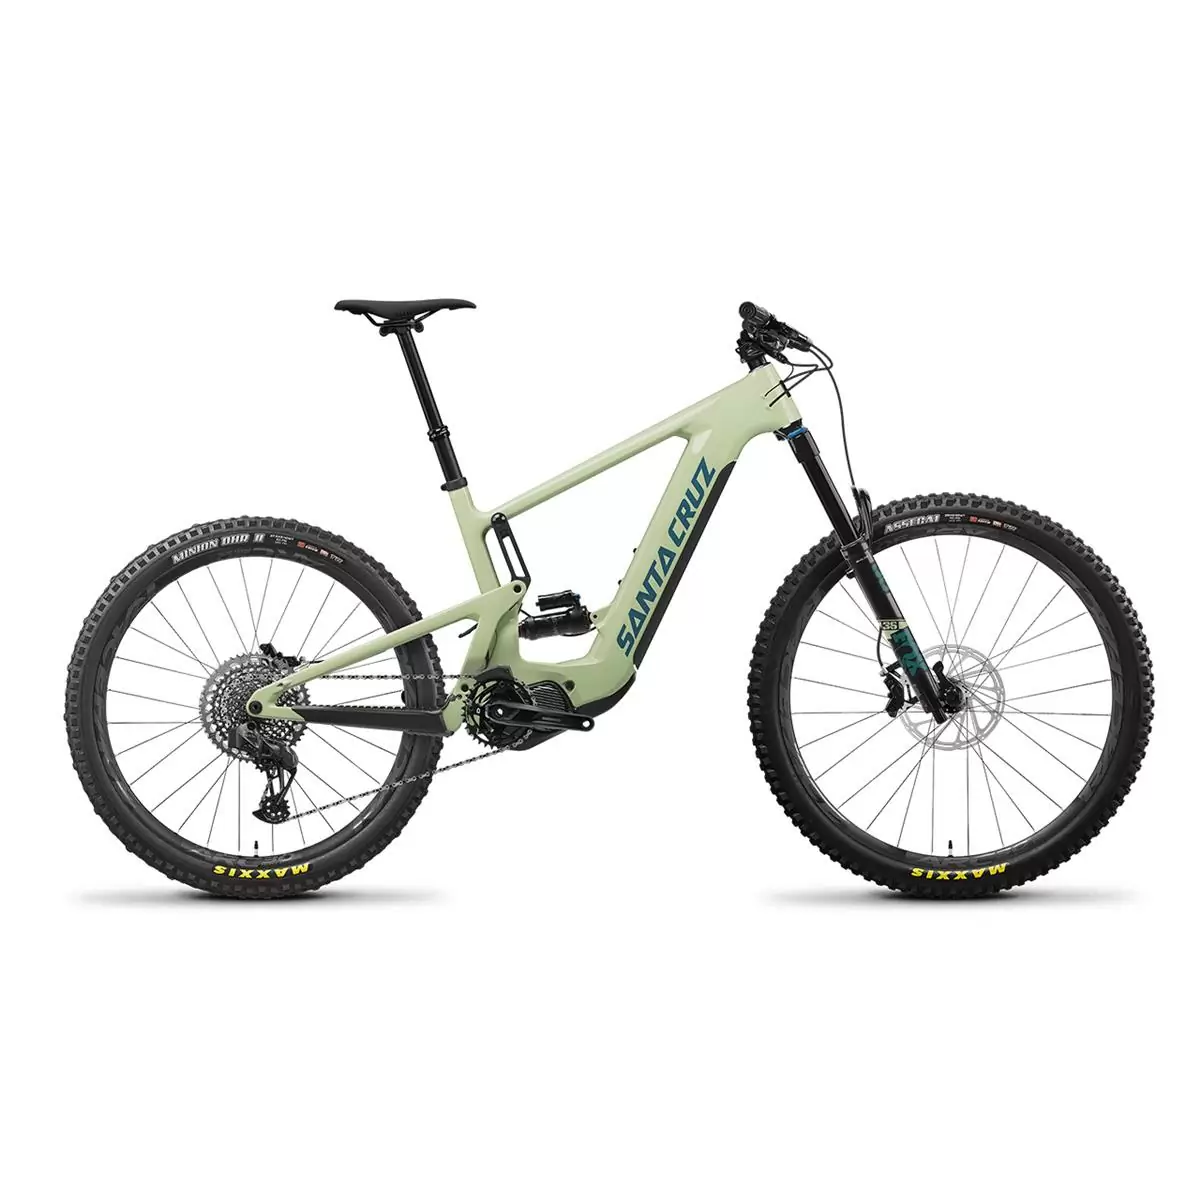 Heckler 9 C MX GX AXS 29/27.5'' 160mm 12s 720Wh Shimano EP8 Marítimo Gris 2023 Talla M - image